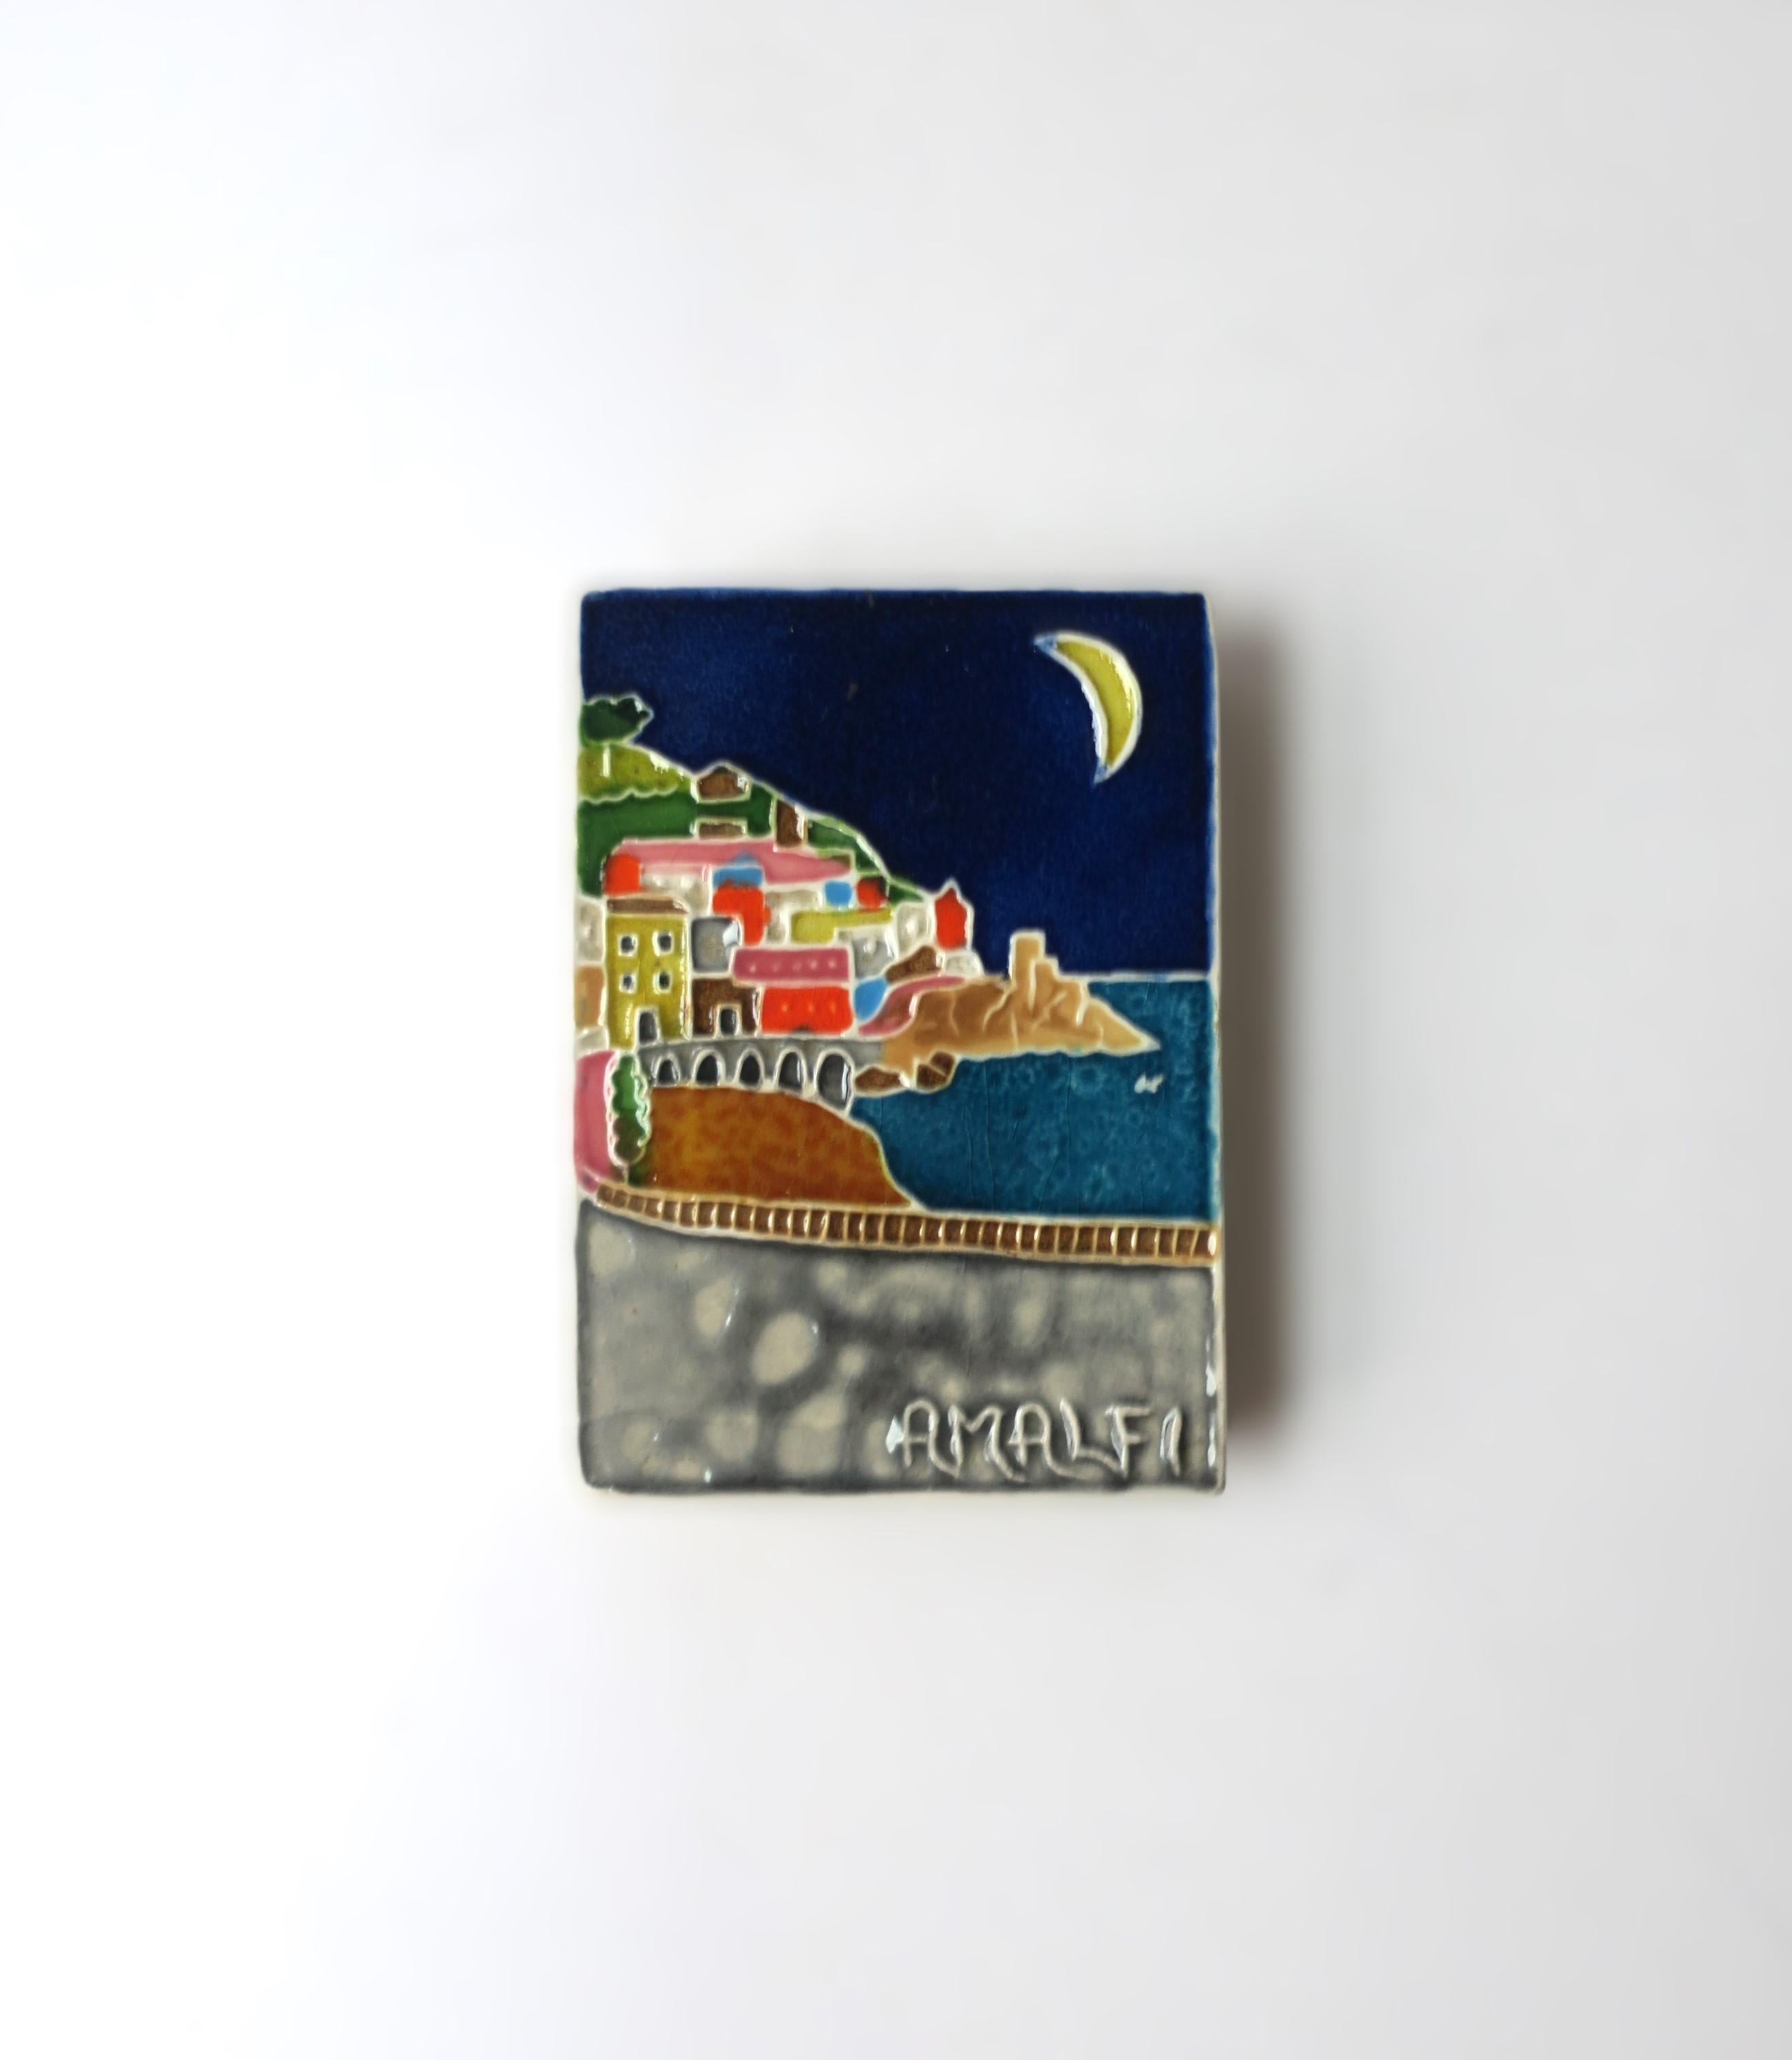 An Italian matchbox case with ceramic 'Amalfi' coast decorative tile, circa mid-20th century, Italy. A beautiful, colorful Italian ceramic tile with Amalfi coast scene holding four (4) matchboxes with striker sides. Strike-up your best candles, or